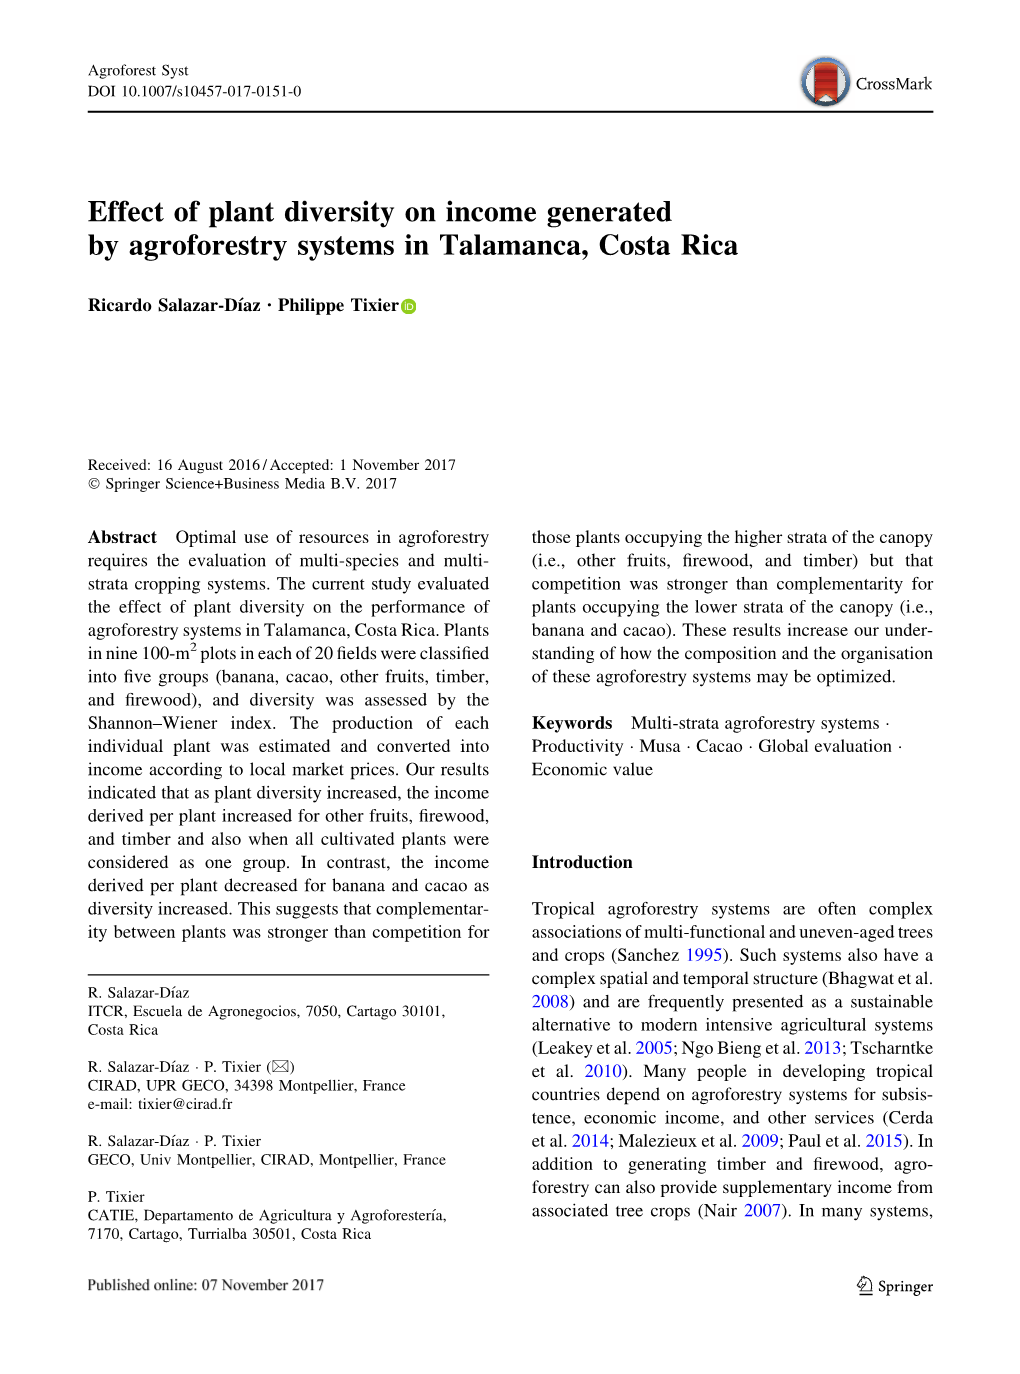 Effect of Plant Diversity on Income Generated by Agroforestry Systems in Talamanca, Costa Rica